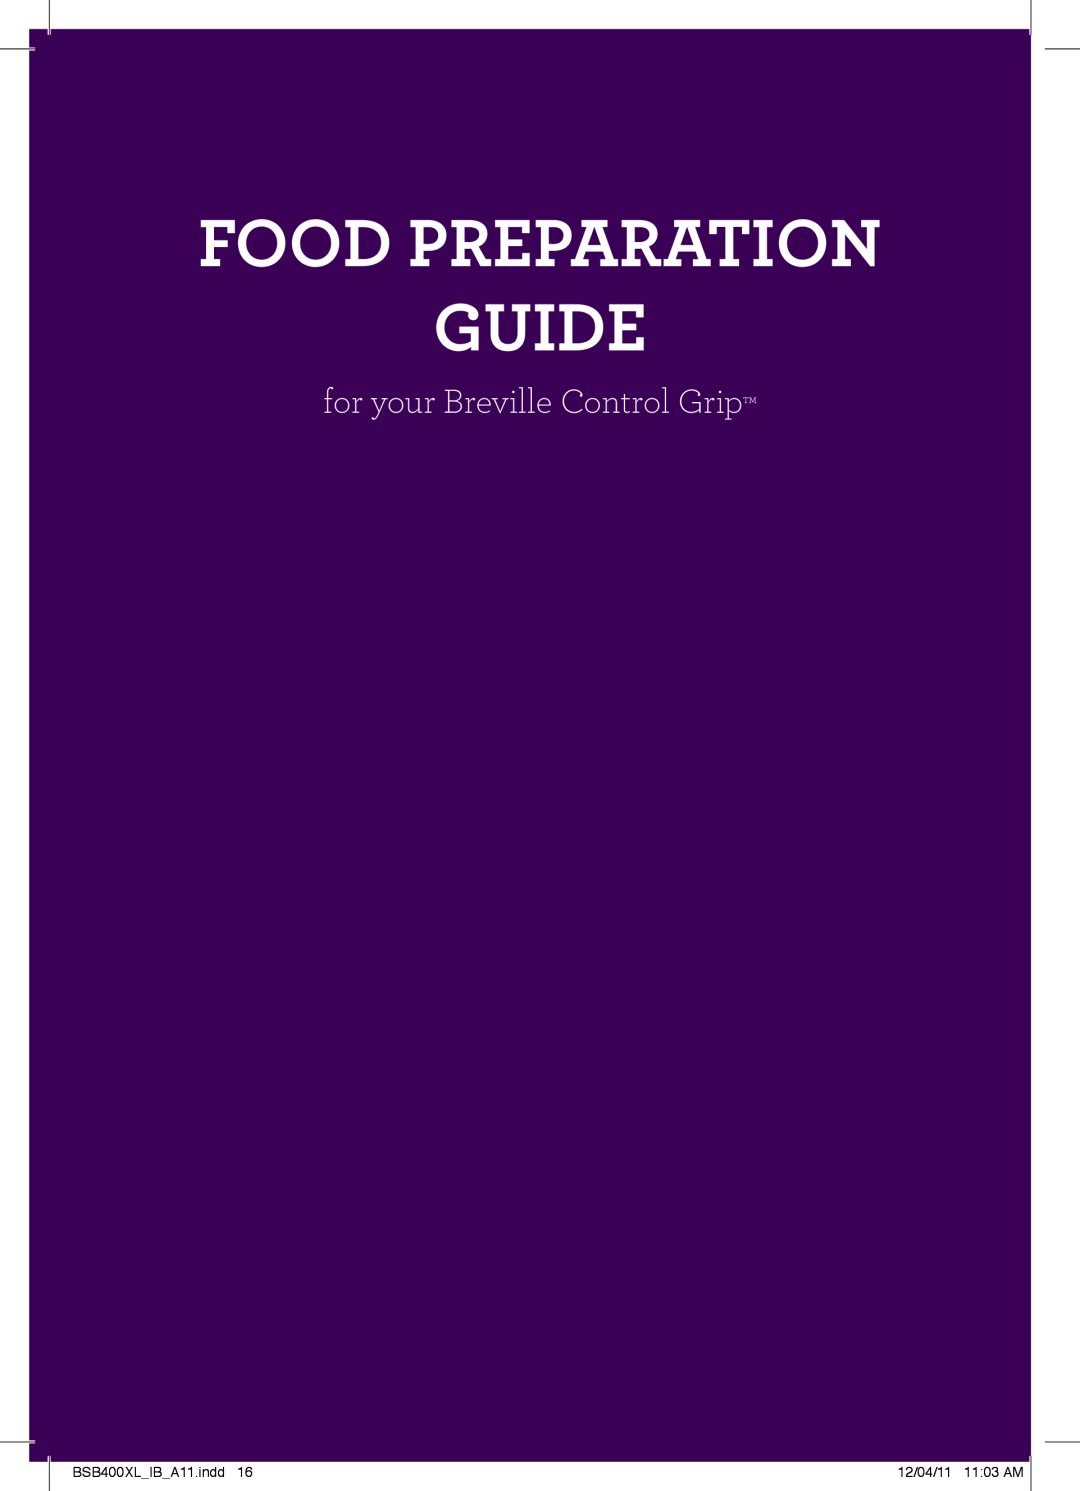 Breville manual Food Preparation Guide, for your Breville Control Grip, Typeset, BSB400XLIBA11.indd, 12/04/11 1103 AM 